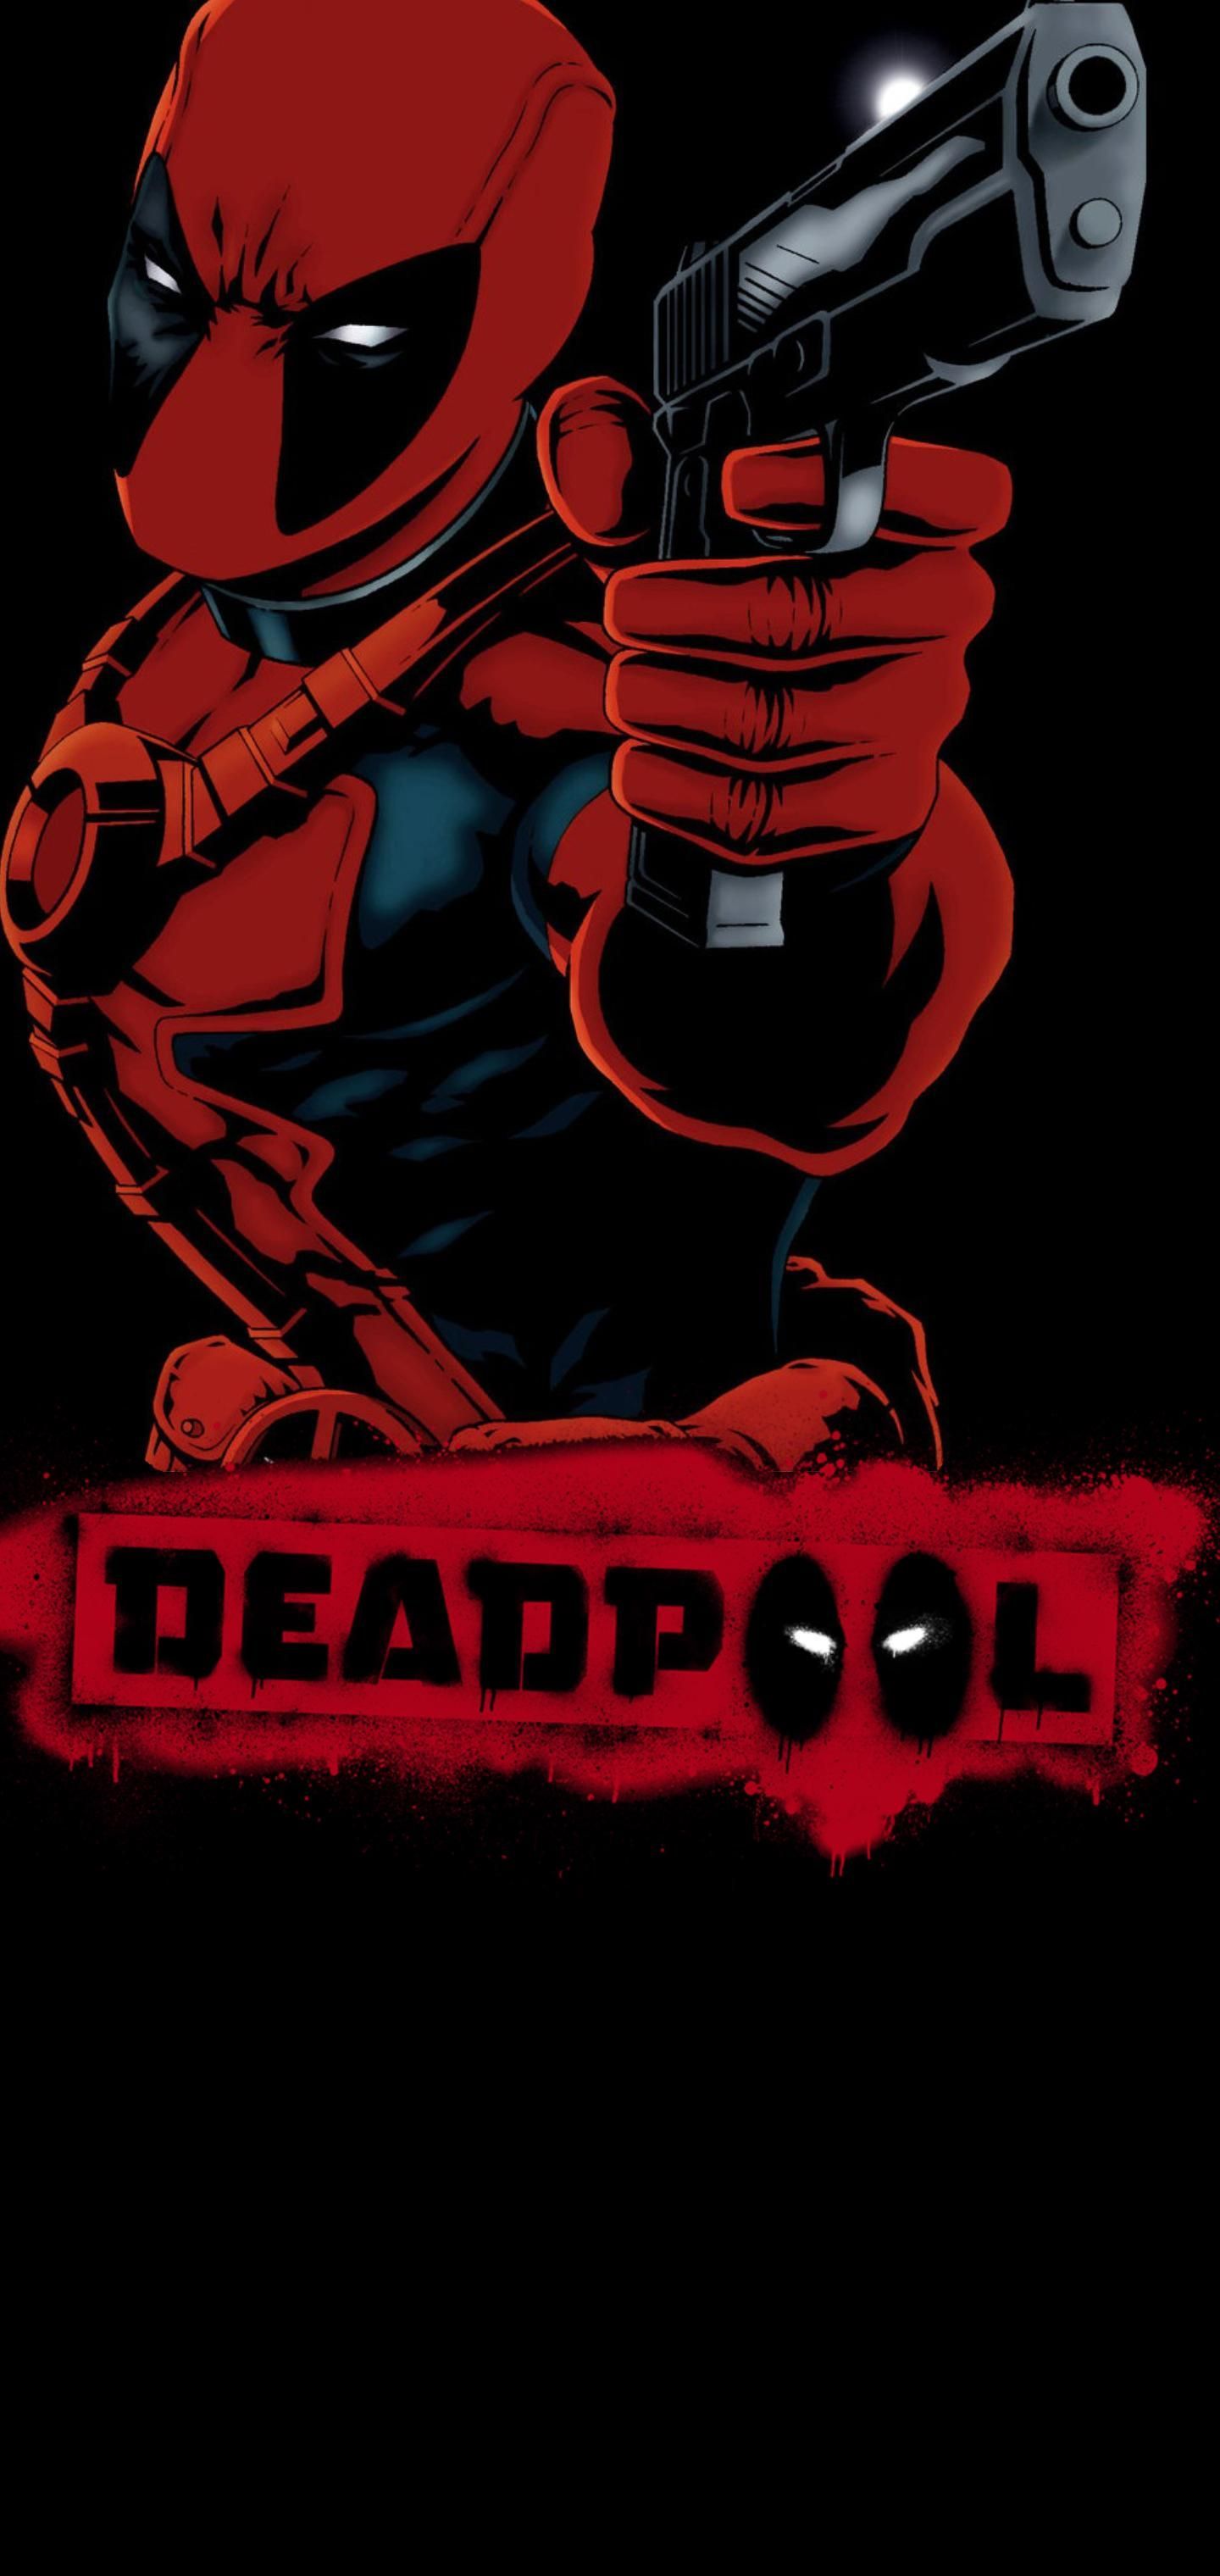 Punch Hole Wallpaper For Samsung Galaxy S10. Samsung Galaxy Wallpaper, Samsung Wallpaper, Deadpool Wallpaper